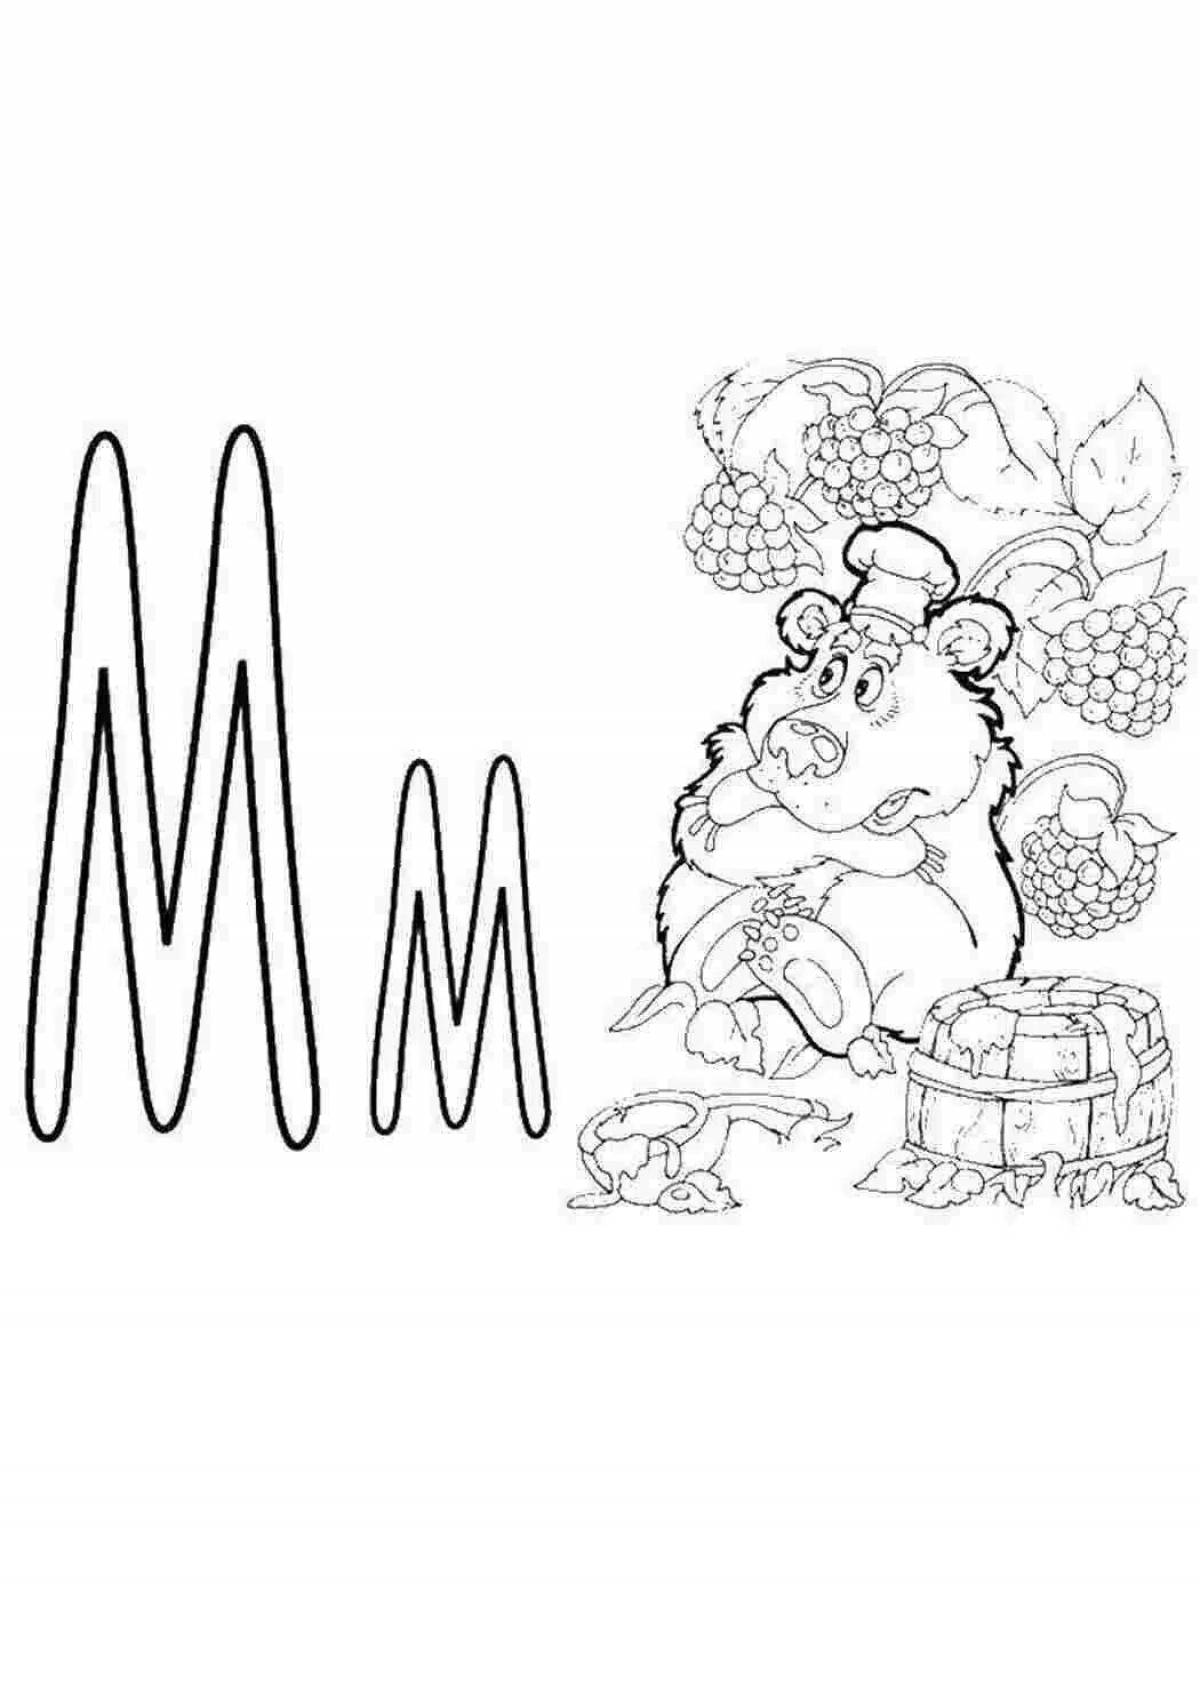 Colorful m sound coloring page for kids